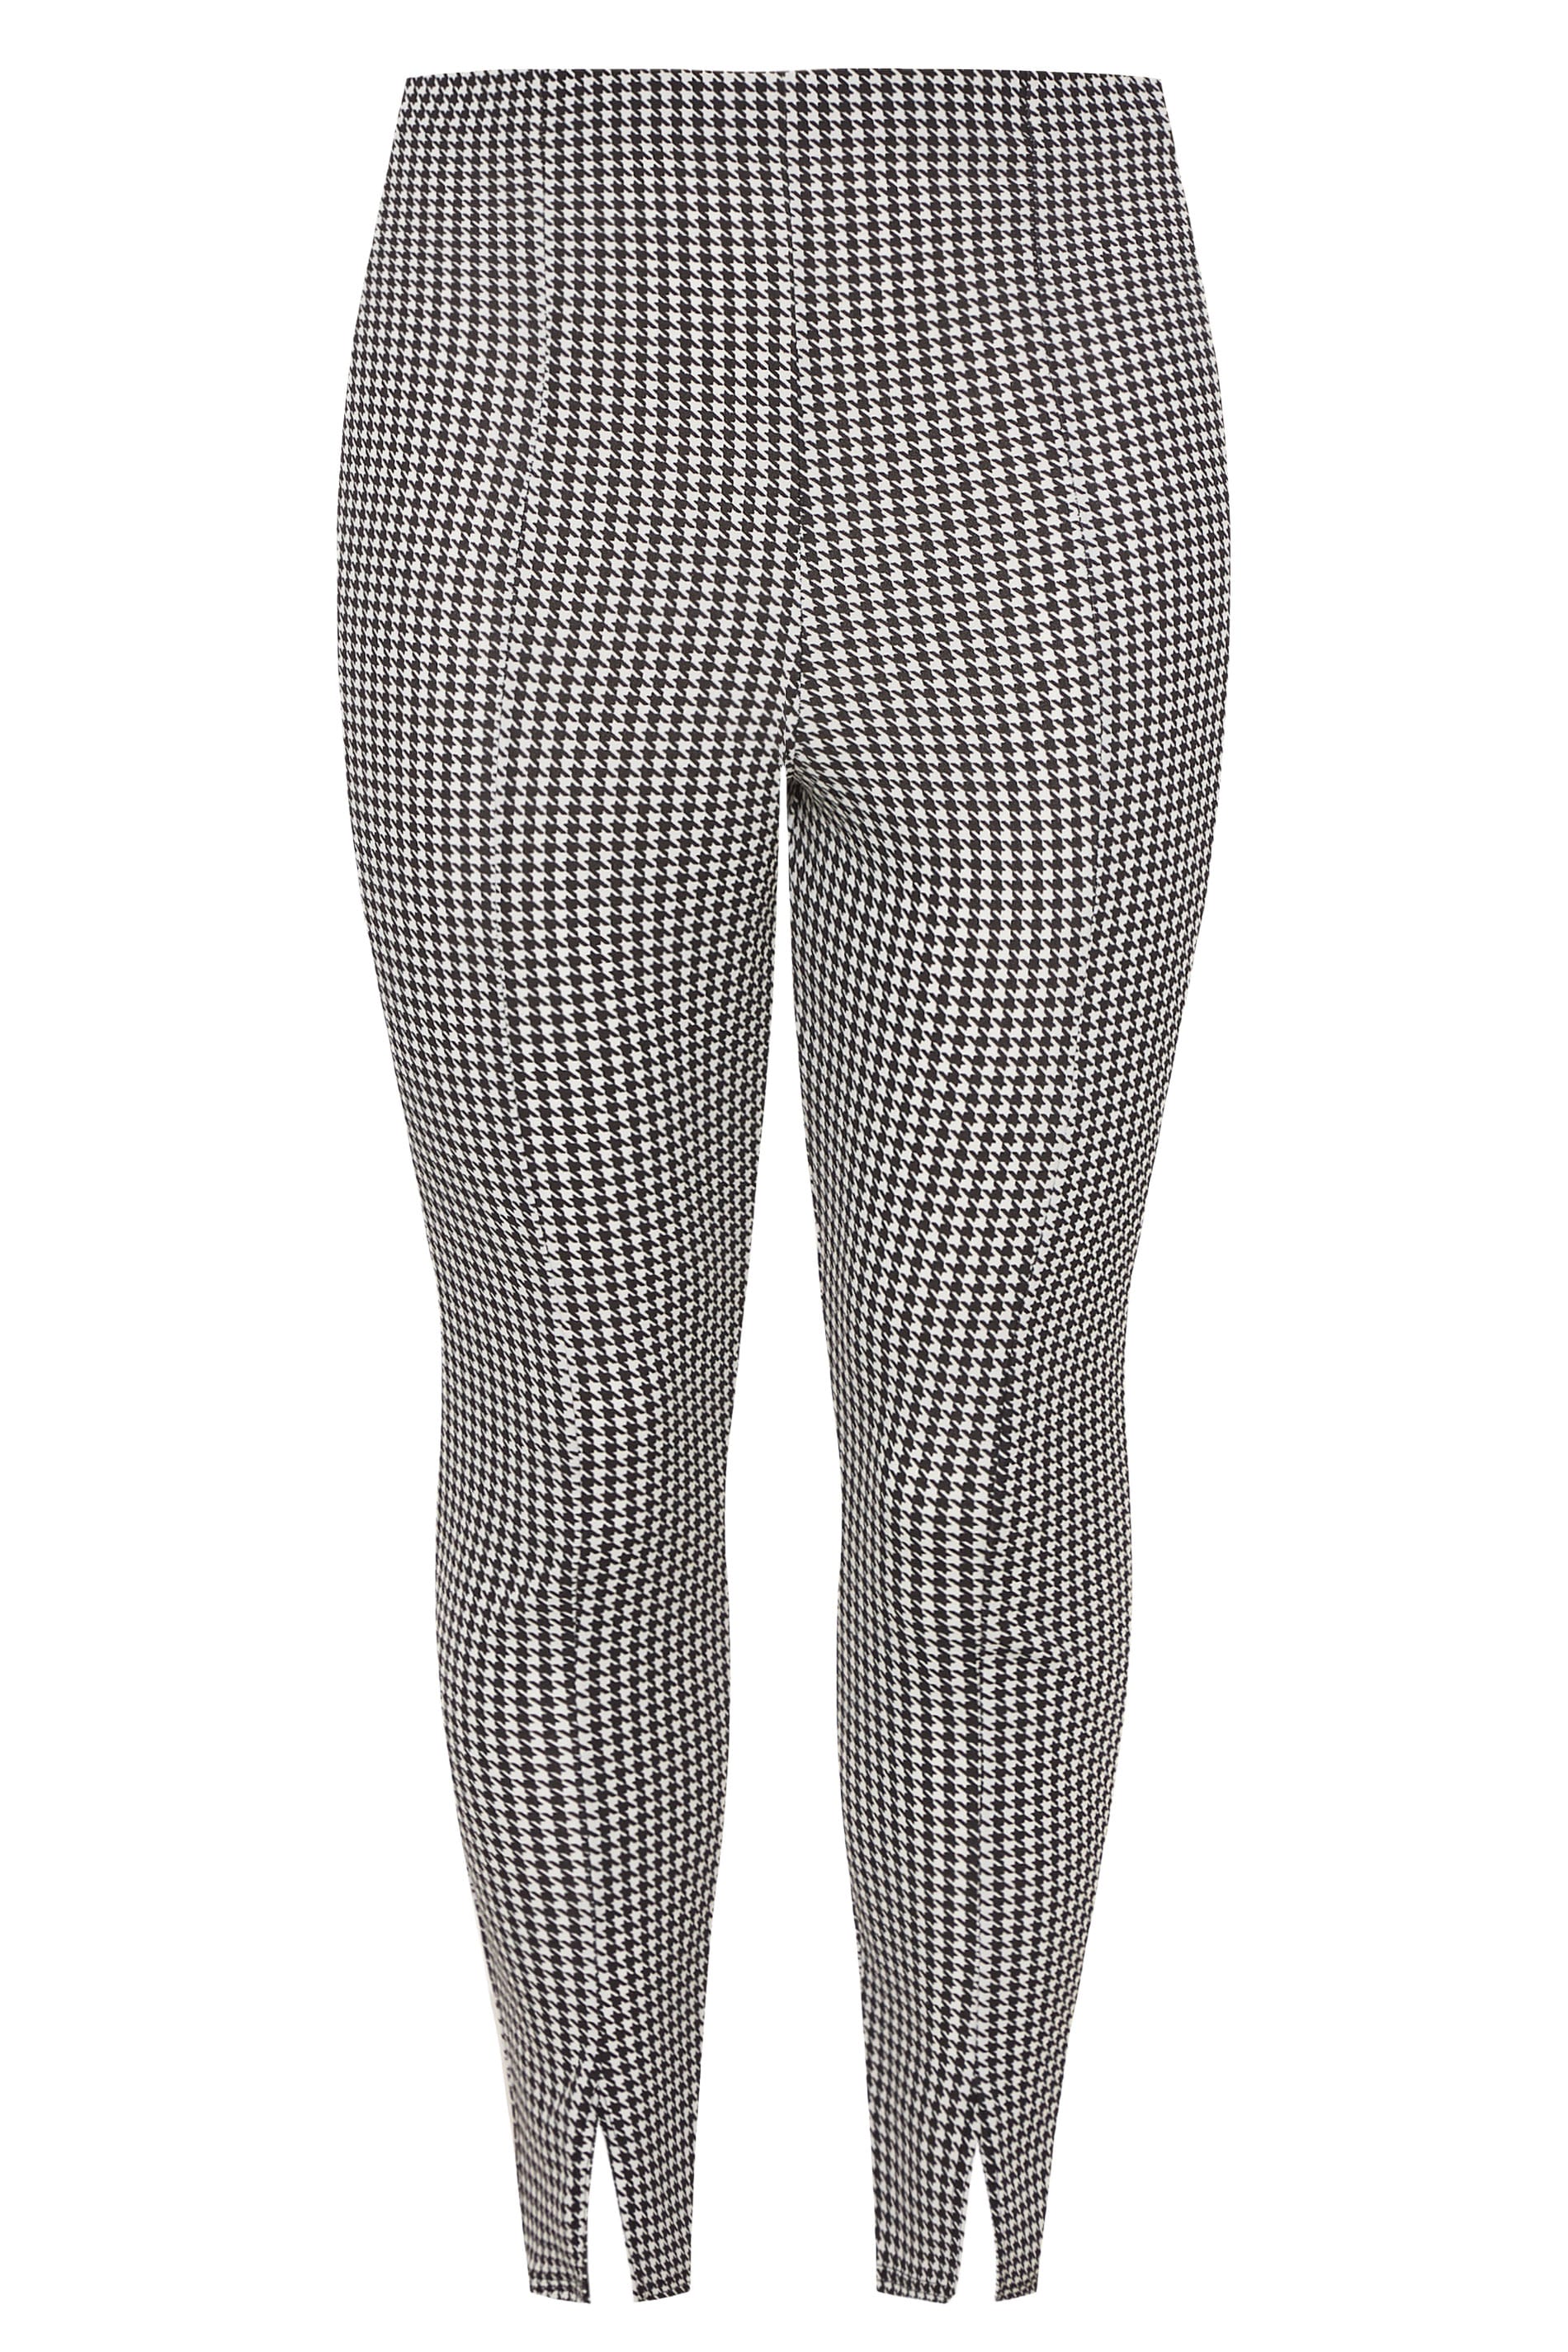 Black Dogtooth Check Ponte Tapered Split Hem Trousers | Yours Clothing